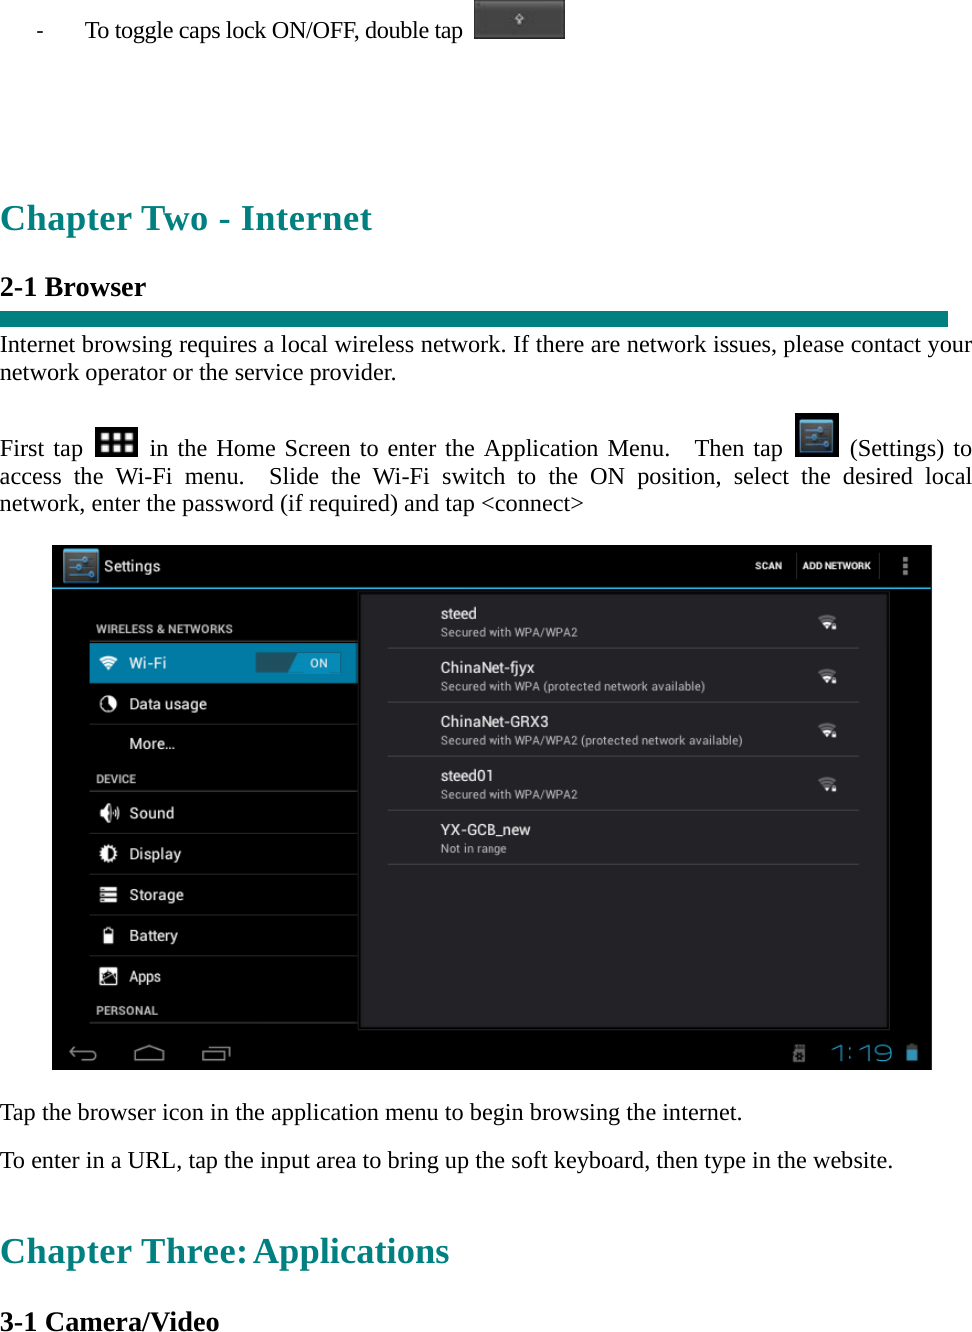 ‐ To toggle caps lock ON/OFF, double tap      Chapter Two - Internet  2-1 Browser  Internet browsing requires a local wireless network. If there are network issues, please contact your network operator or the service provider.  First tap   in the Home Screen to enter the Application Menu.  Then tap   (Settings) to access the Wi-Fi menu.  Slide the Wi-Fi switch to the ON position, select the desired local network, enter the password (if required) and tap &lt;connect&gt;    Tap the browser icon in the application menu to begin browsing the internet.  To enter in a URL, tap the input area to bring up the soft keyboard, then type in the website.   Chapter Three: Applications  3-1 Camera/Video   